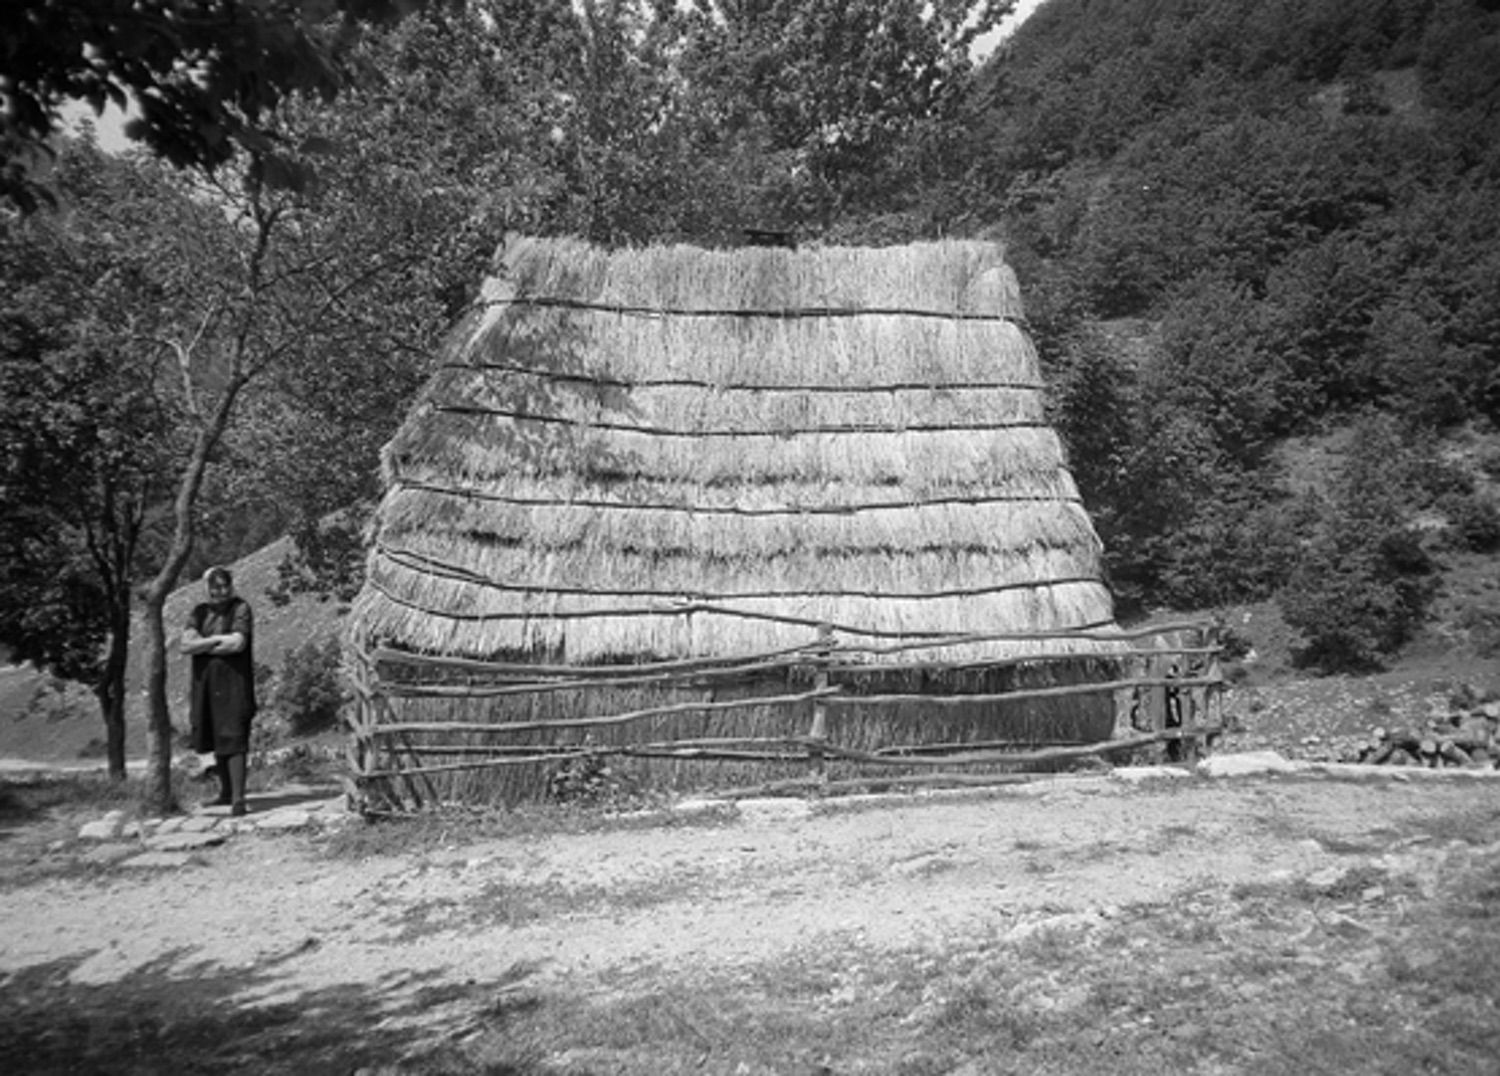 <p>Rijeka is a village on the road that parallels the Zalomska River in northeastern Herzegovina. In this remote highlands area, people like the woman pictured here continued to inhabit dwellings enclosed in straw, probably as seasonal pasture shelters. The fence around the house may protect the straw from hungry animals.</p>